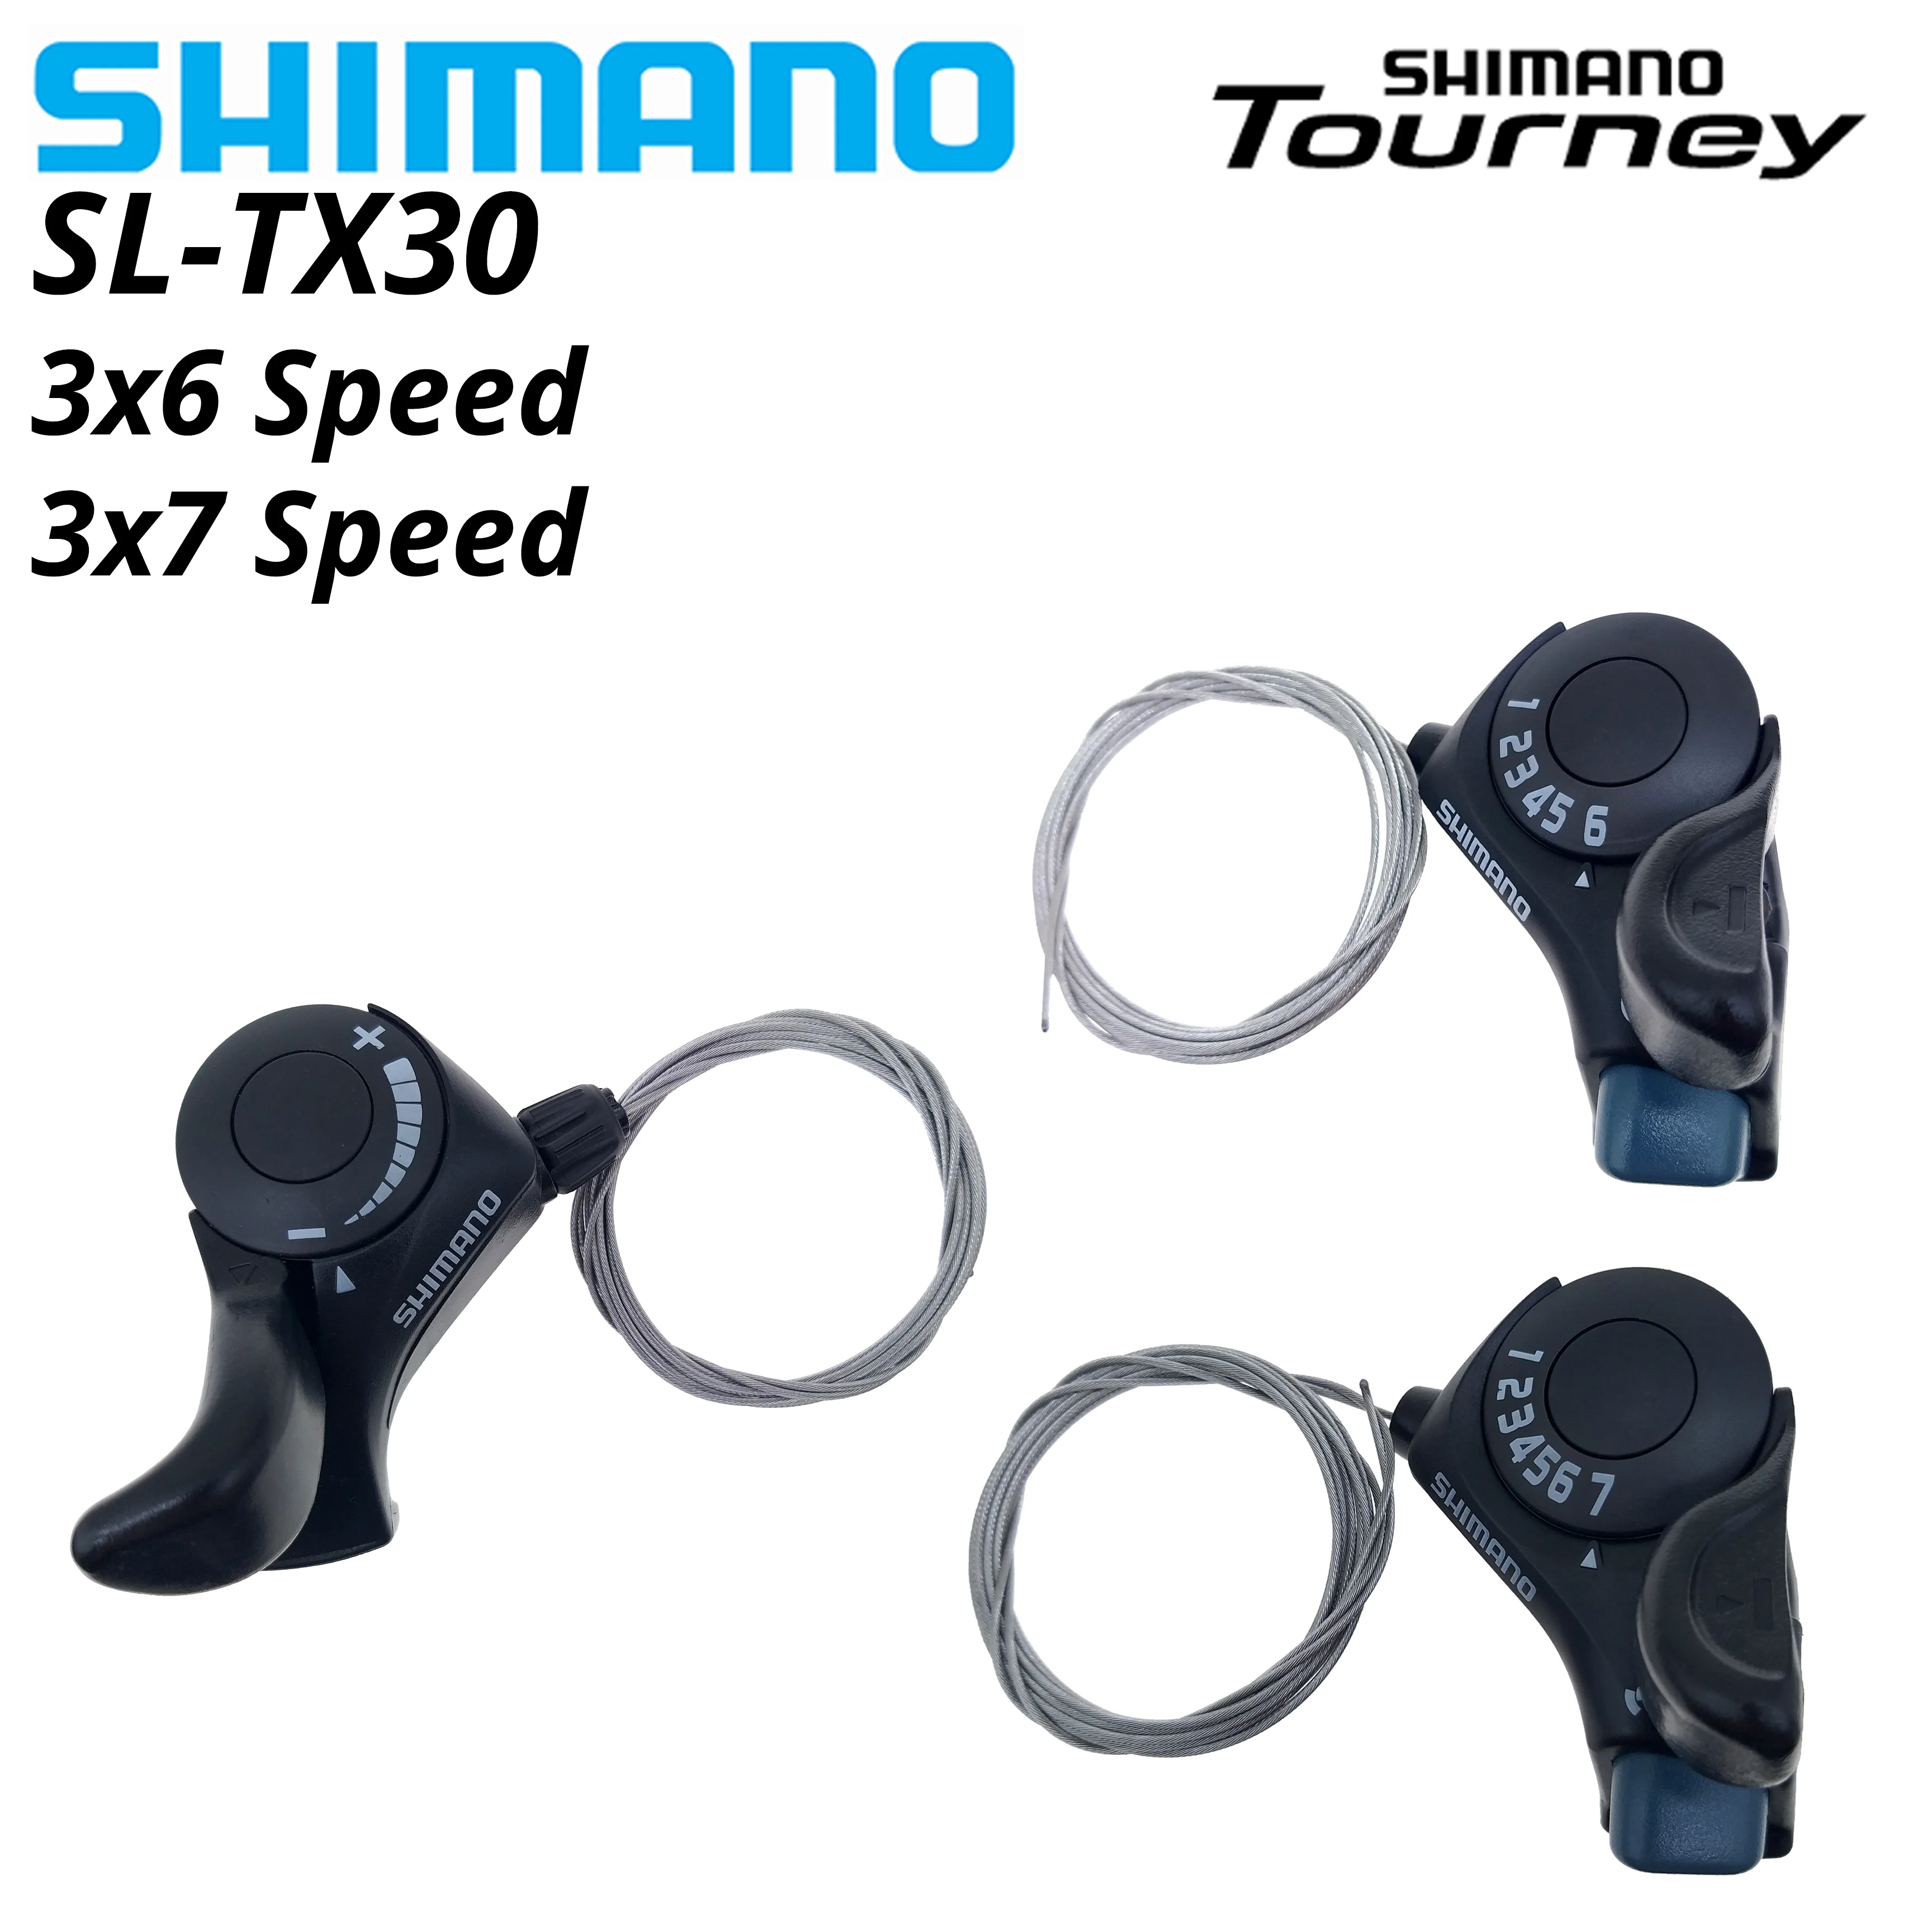 Shimano Tourney SL TX30 Bicycle Shift Lever 6 7s 18 21 Speed  tx30 Shift... - $116.27